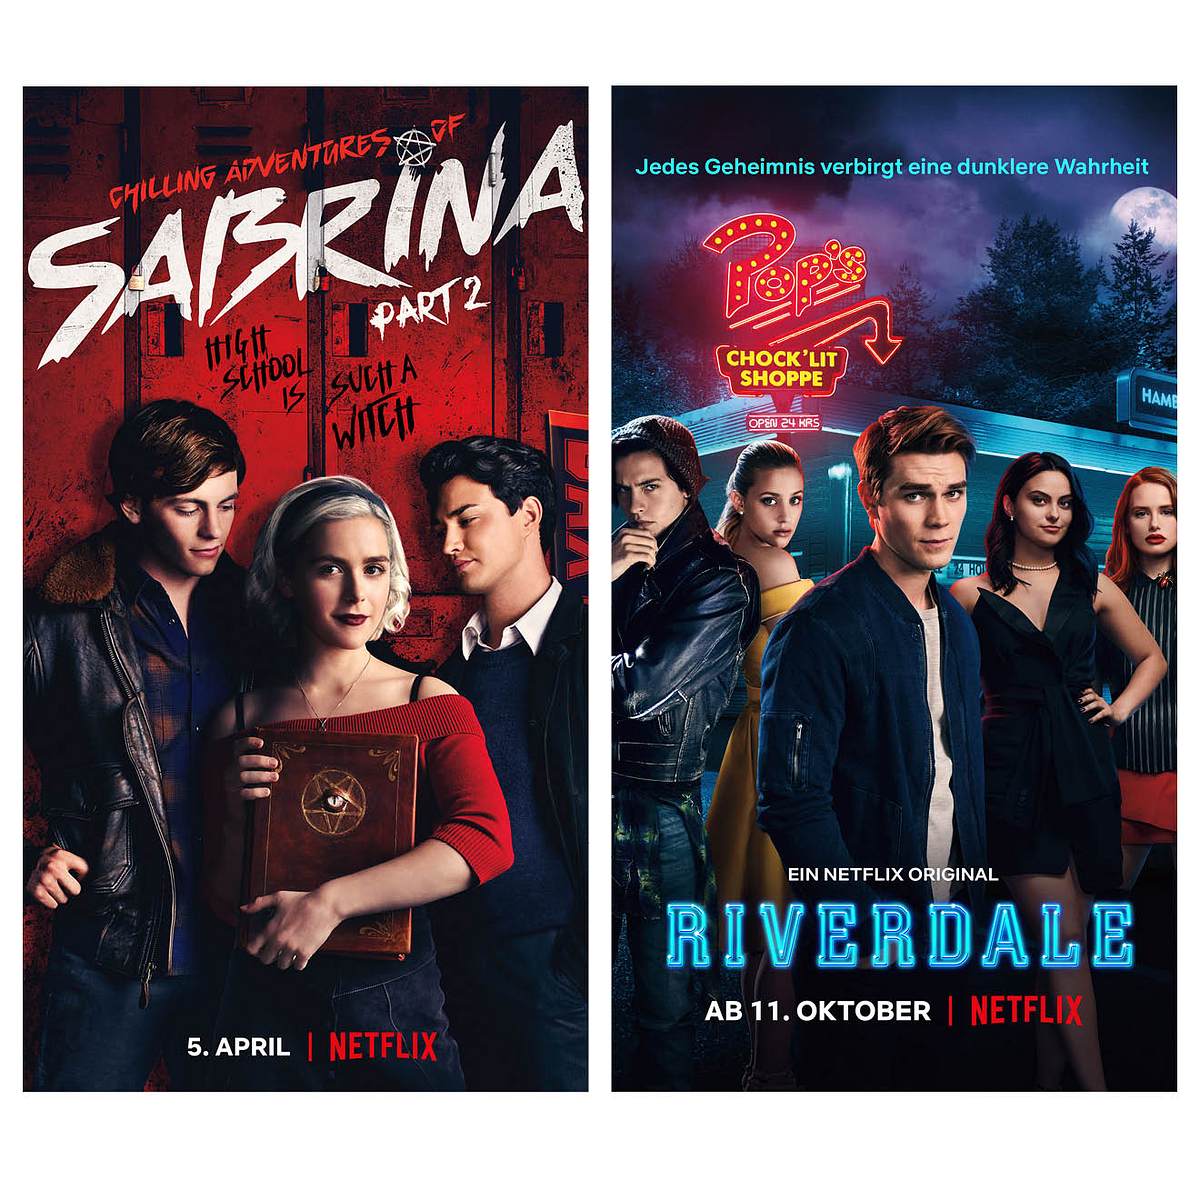 Chilling Adventures of Sabrina bald bei Riverdale?